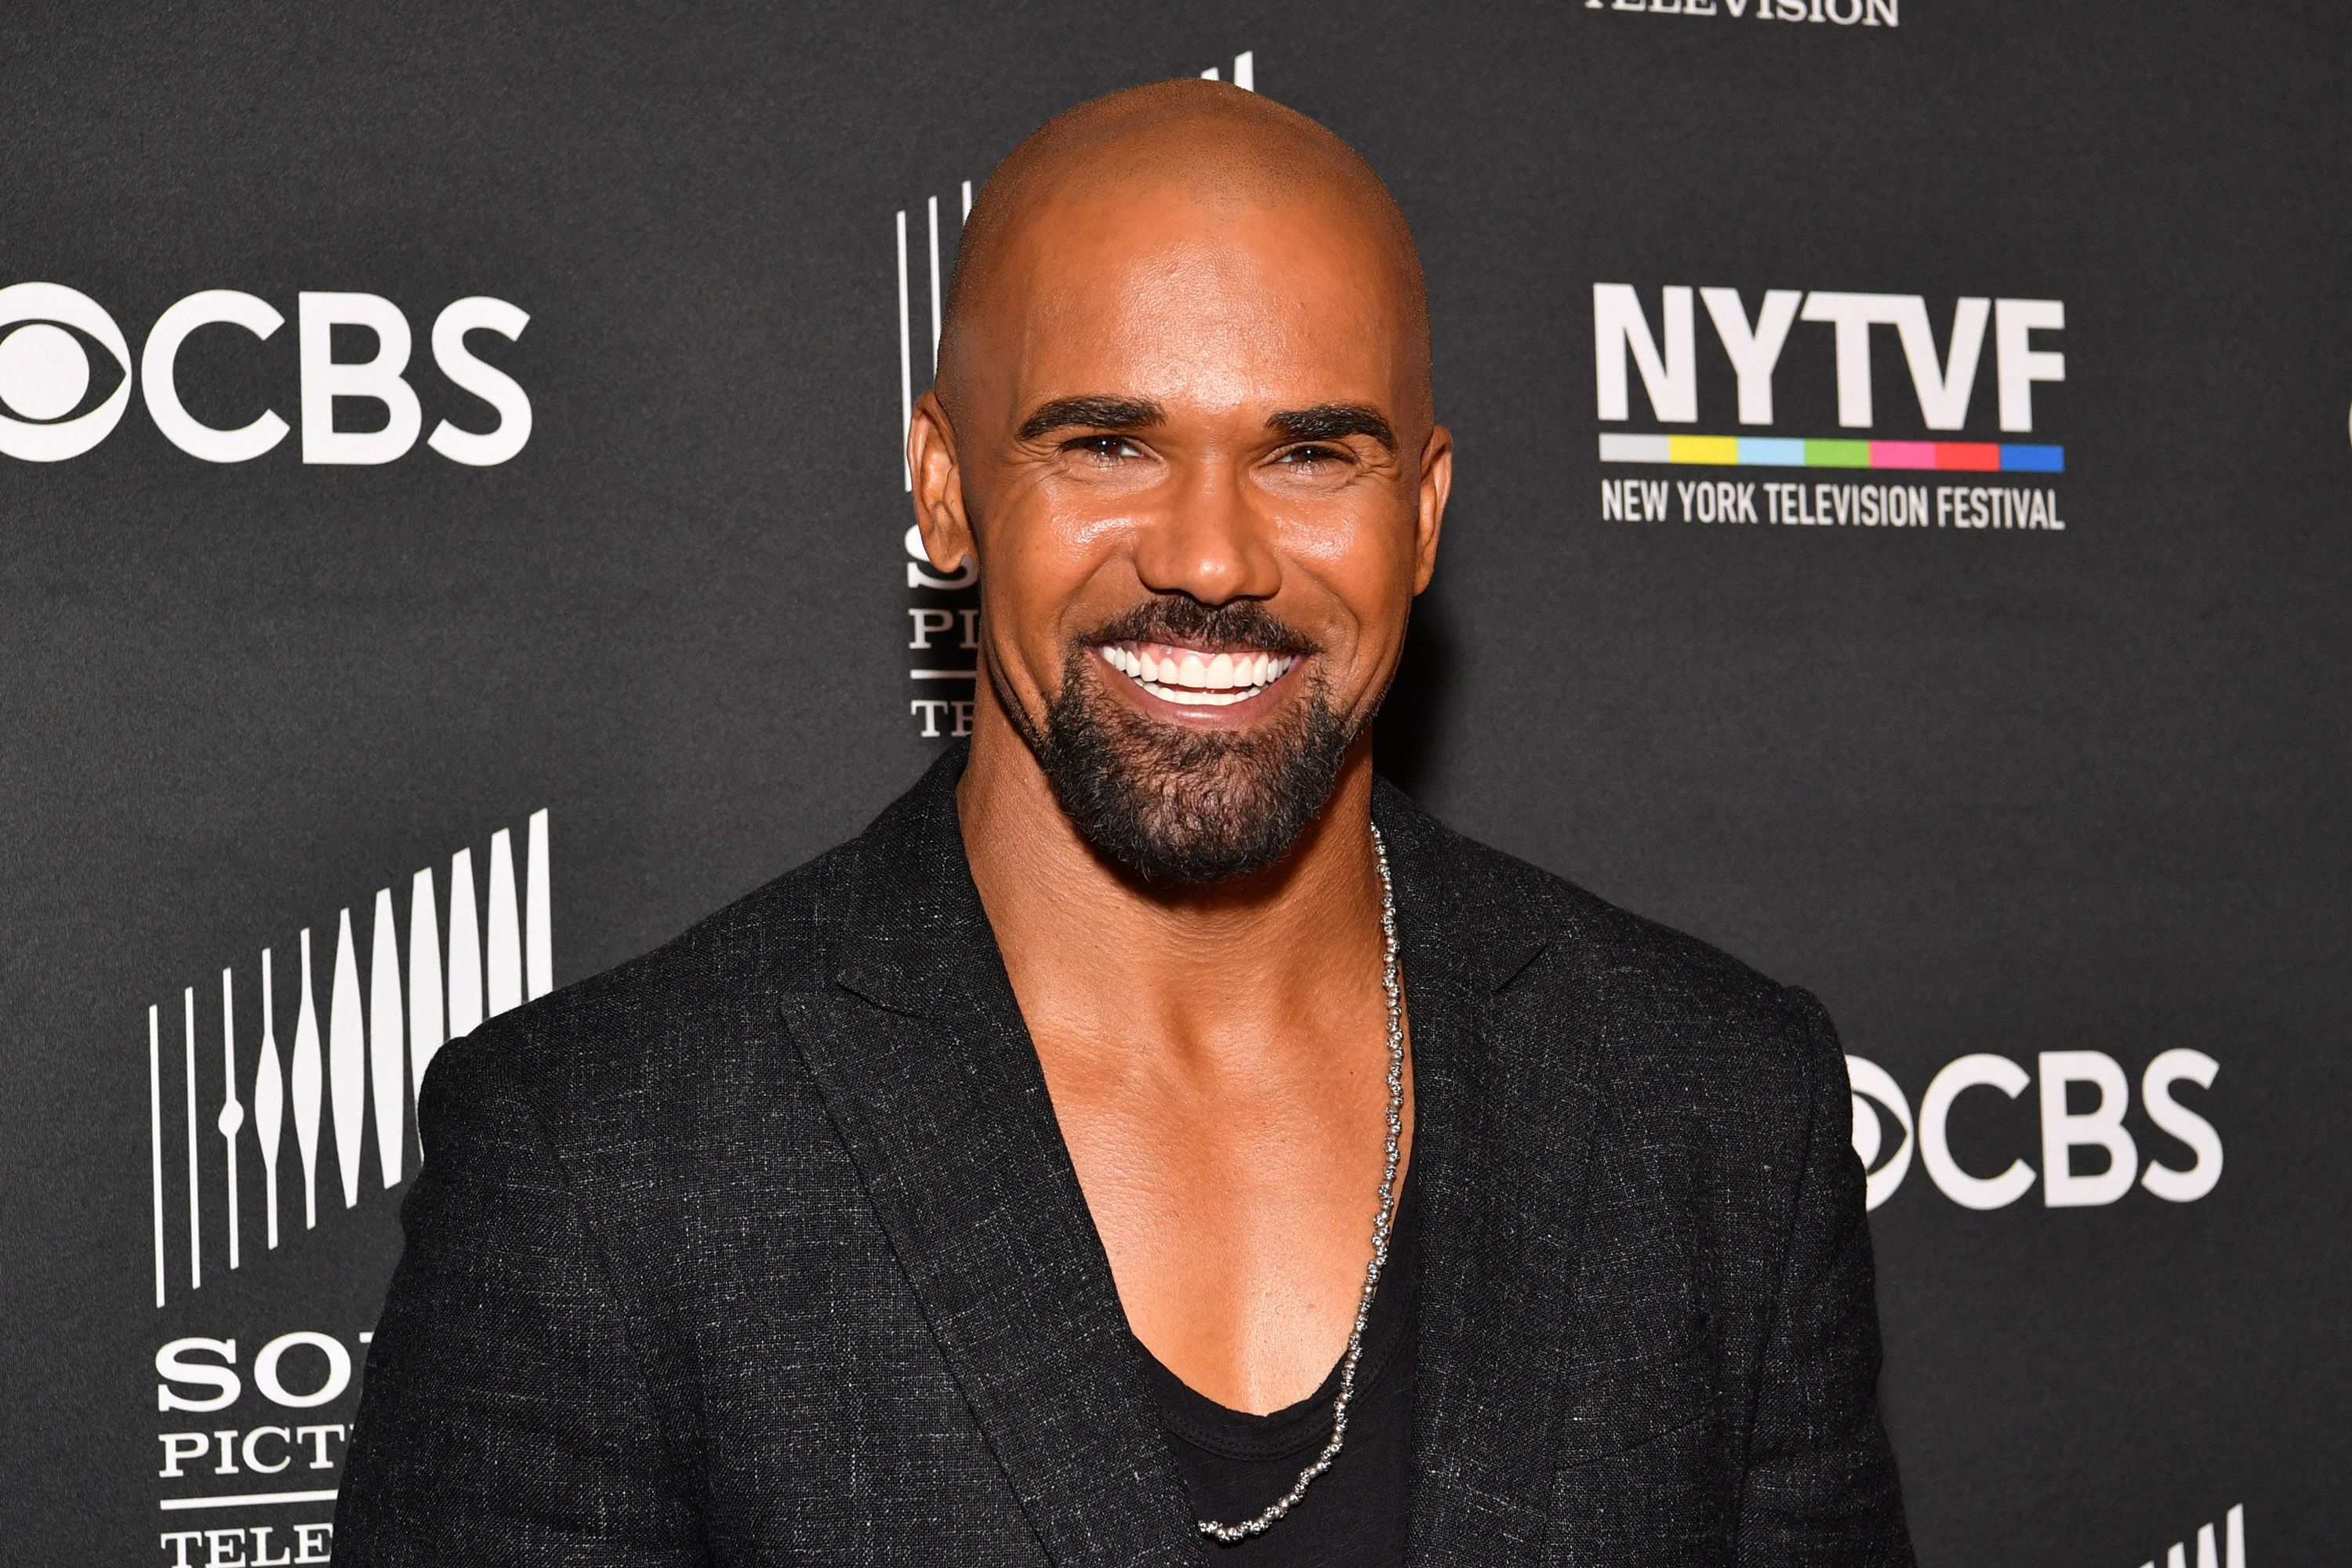 Shemar Moore at the world premiere of the series "S.W.A.T."  in 2017 in Los Angeles | Source: Getty Images